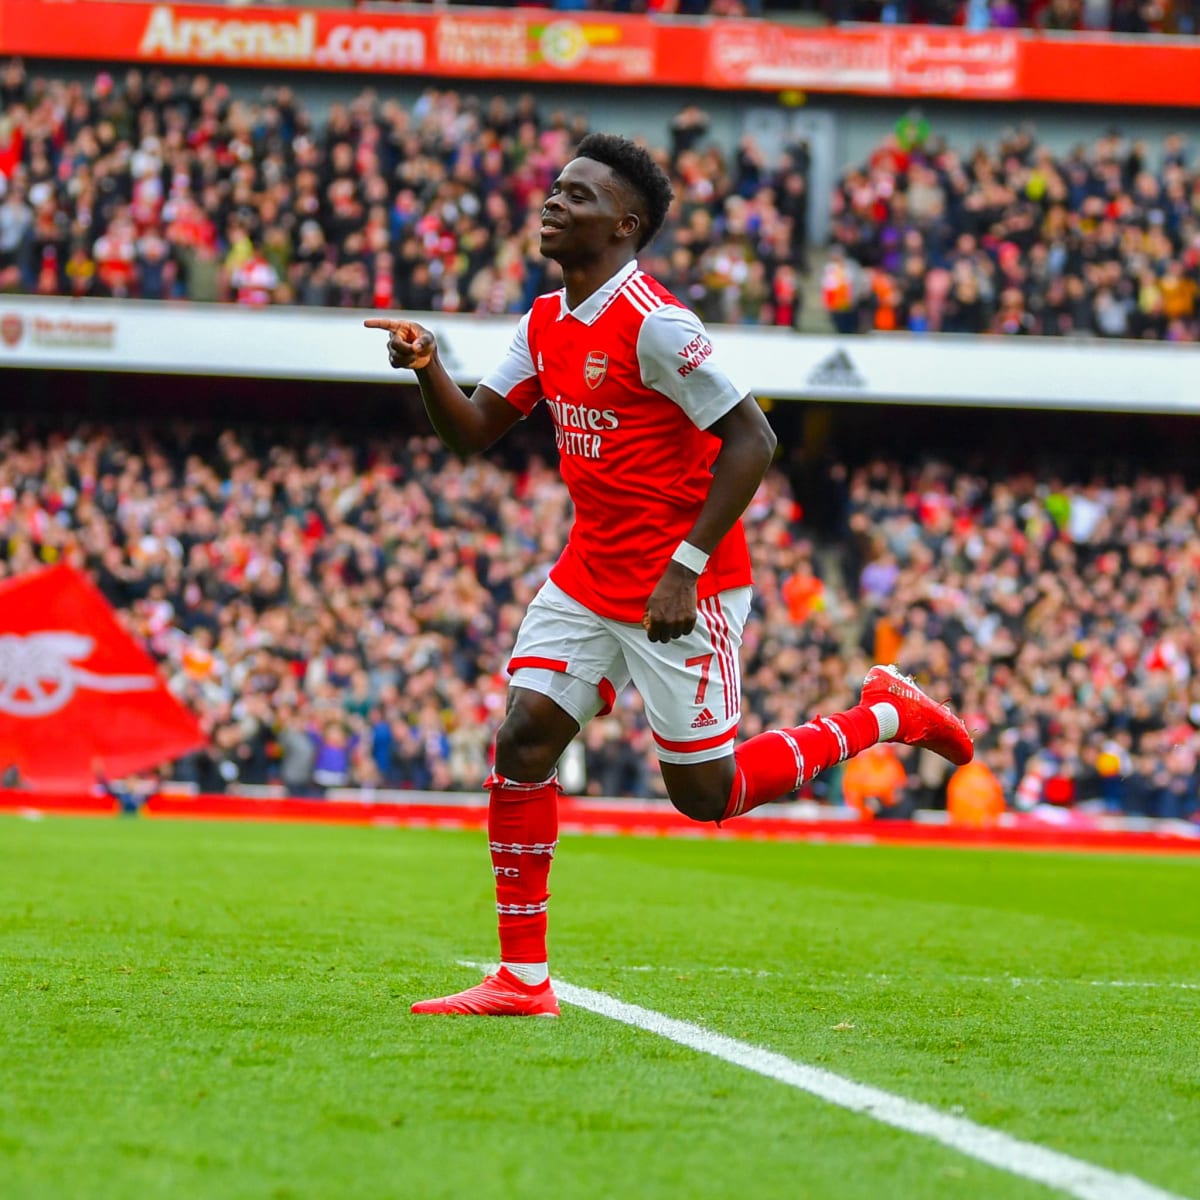 Crystal Palace 0-1 Arsenal LIVE RESULT: Gunners hold on for big